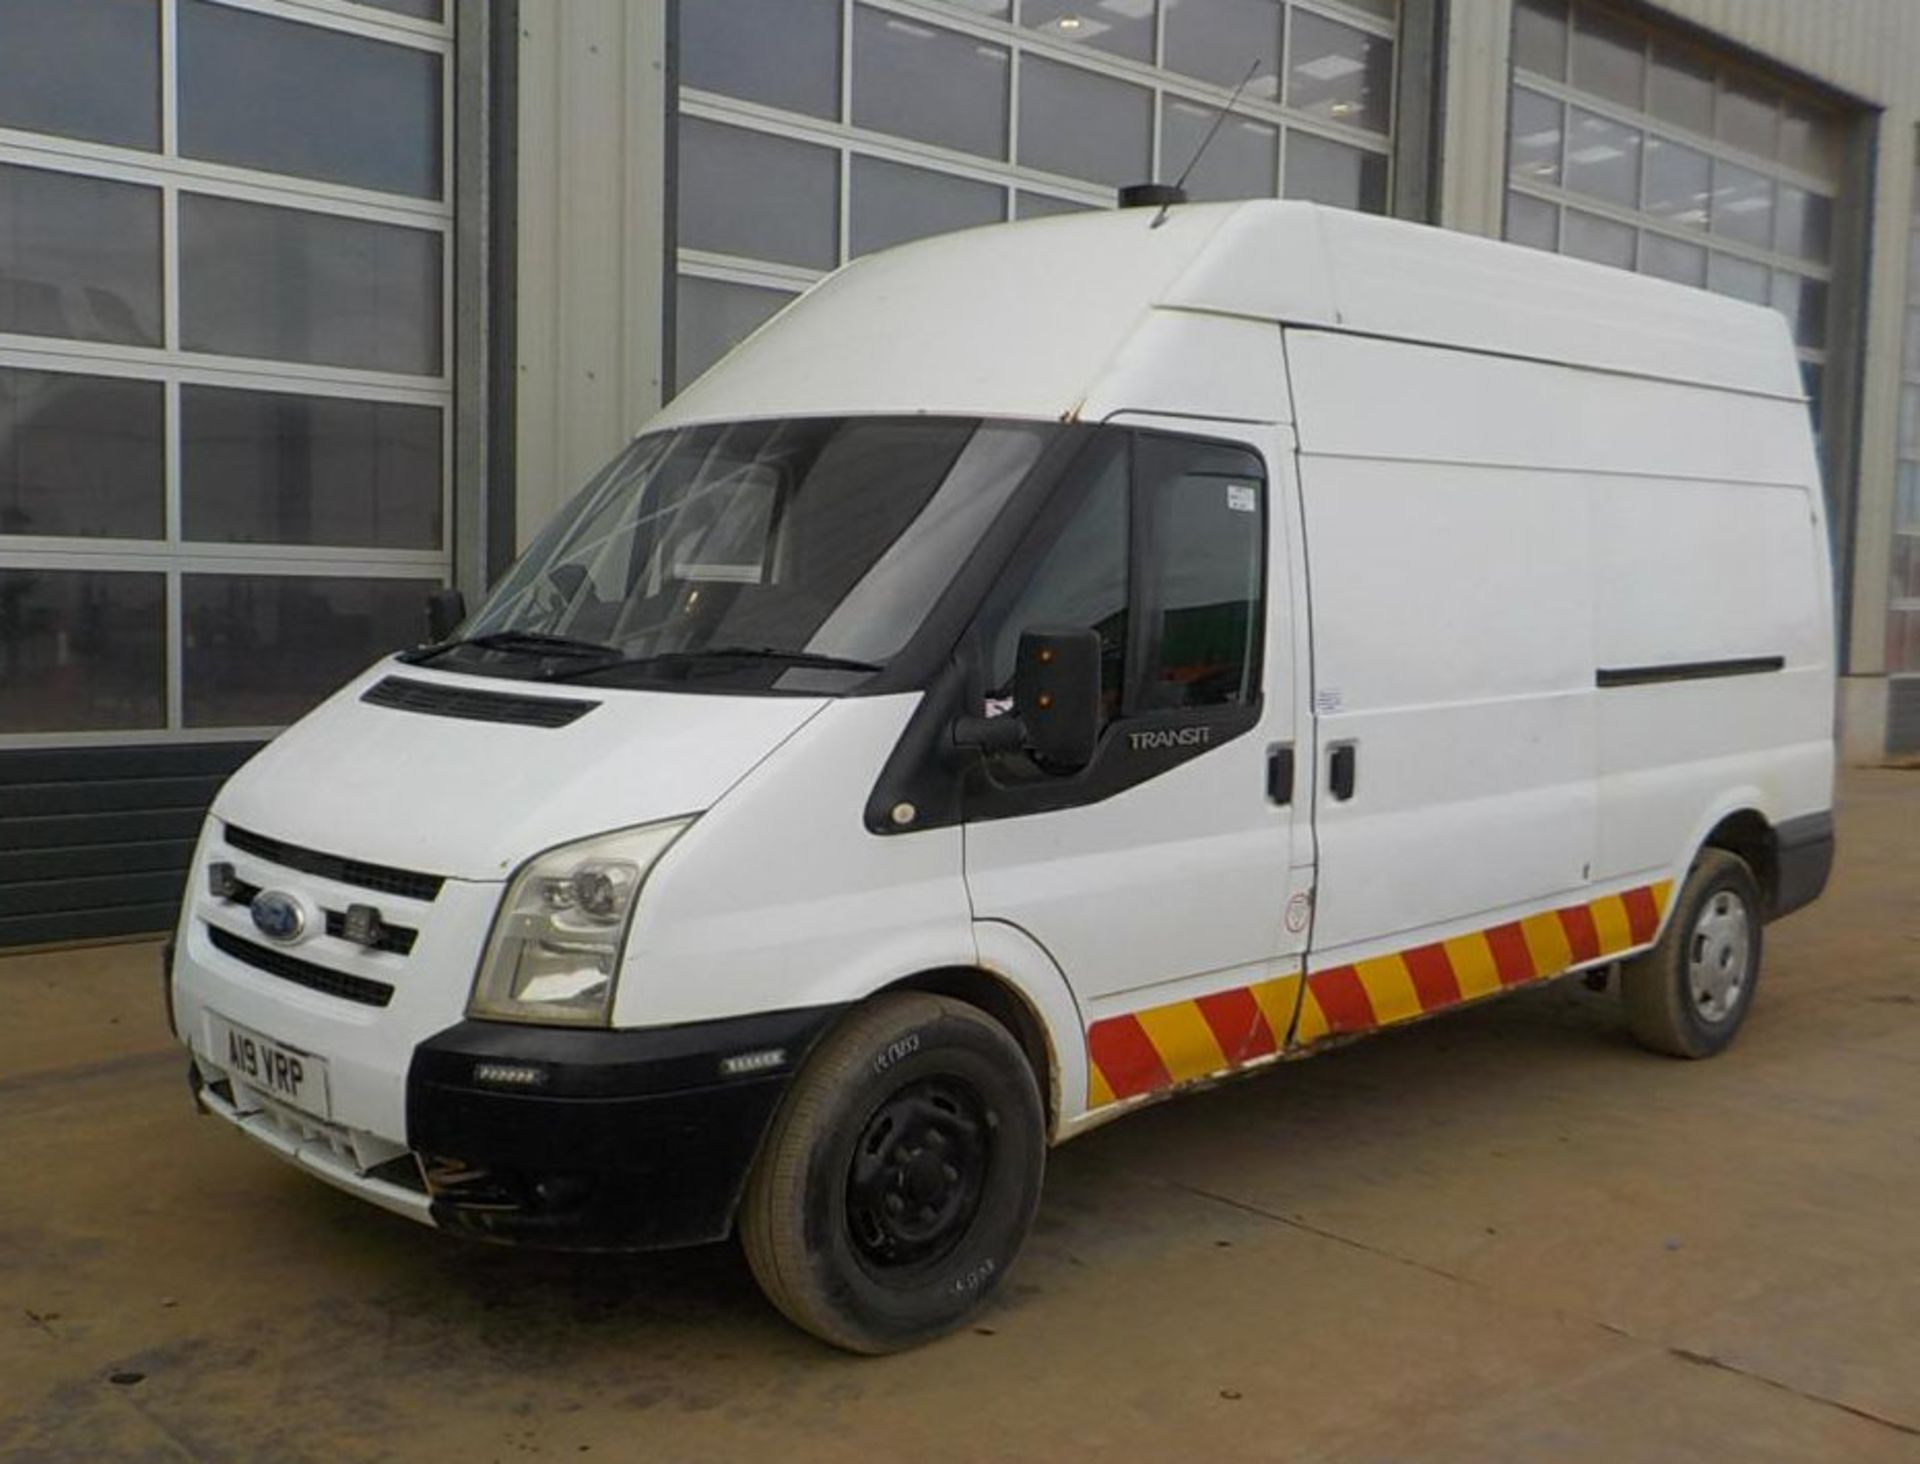 2010 Ford Transit 350 Lwb 140 2.4D Panel Van - CL505 - Location: Corby, Northamptonshire - Image 2 of 11